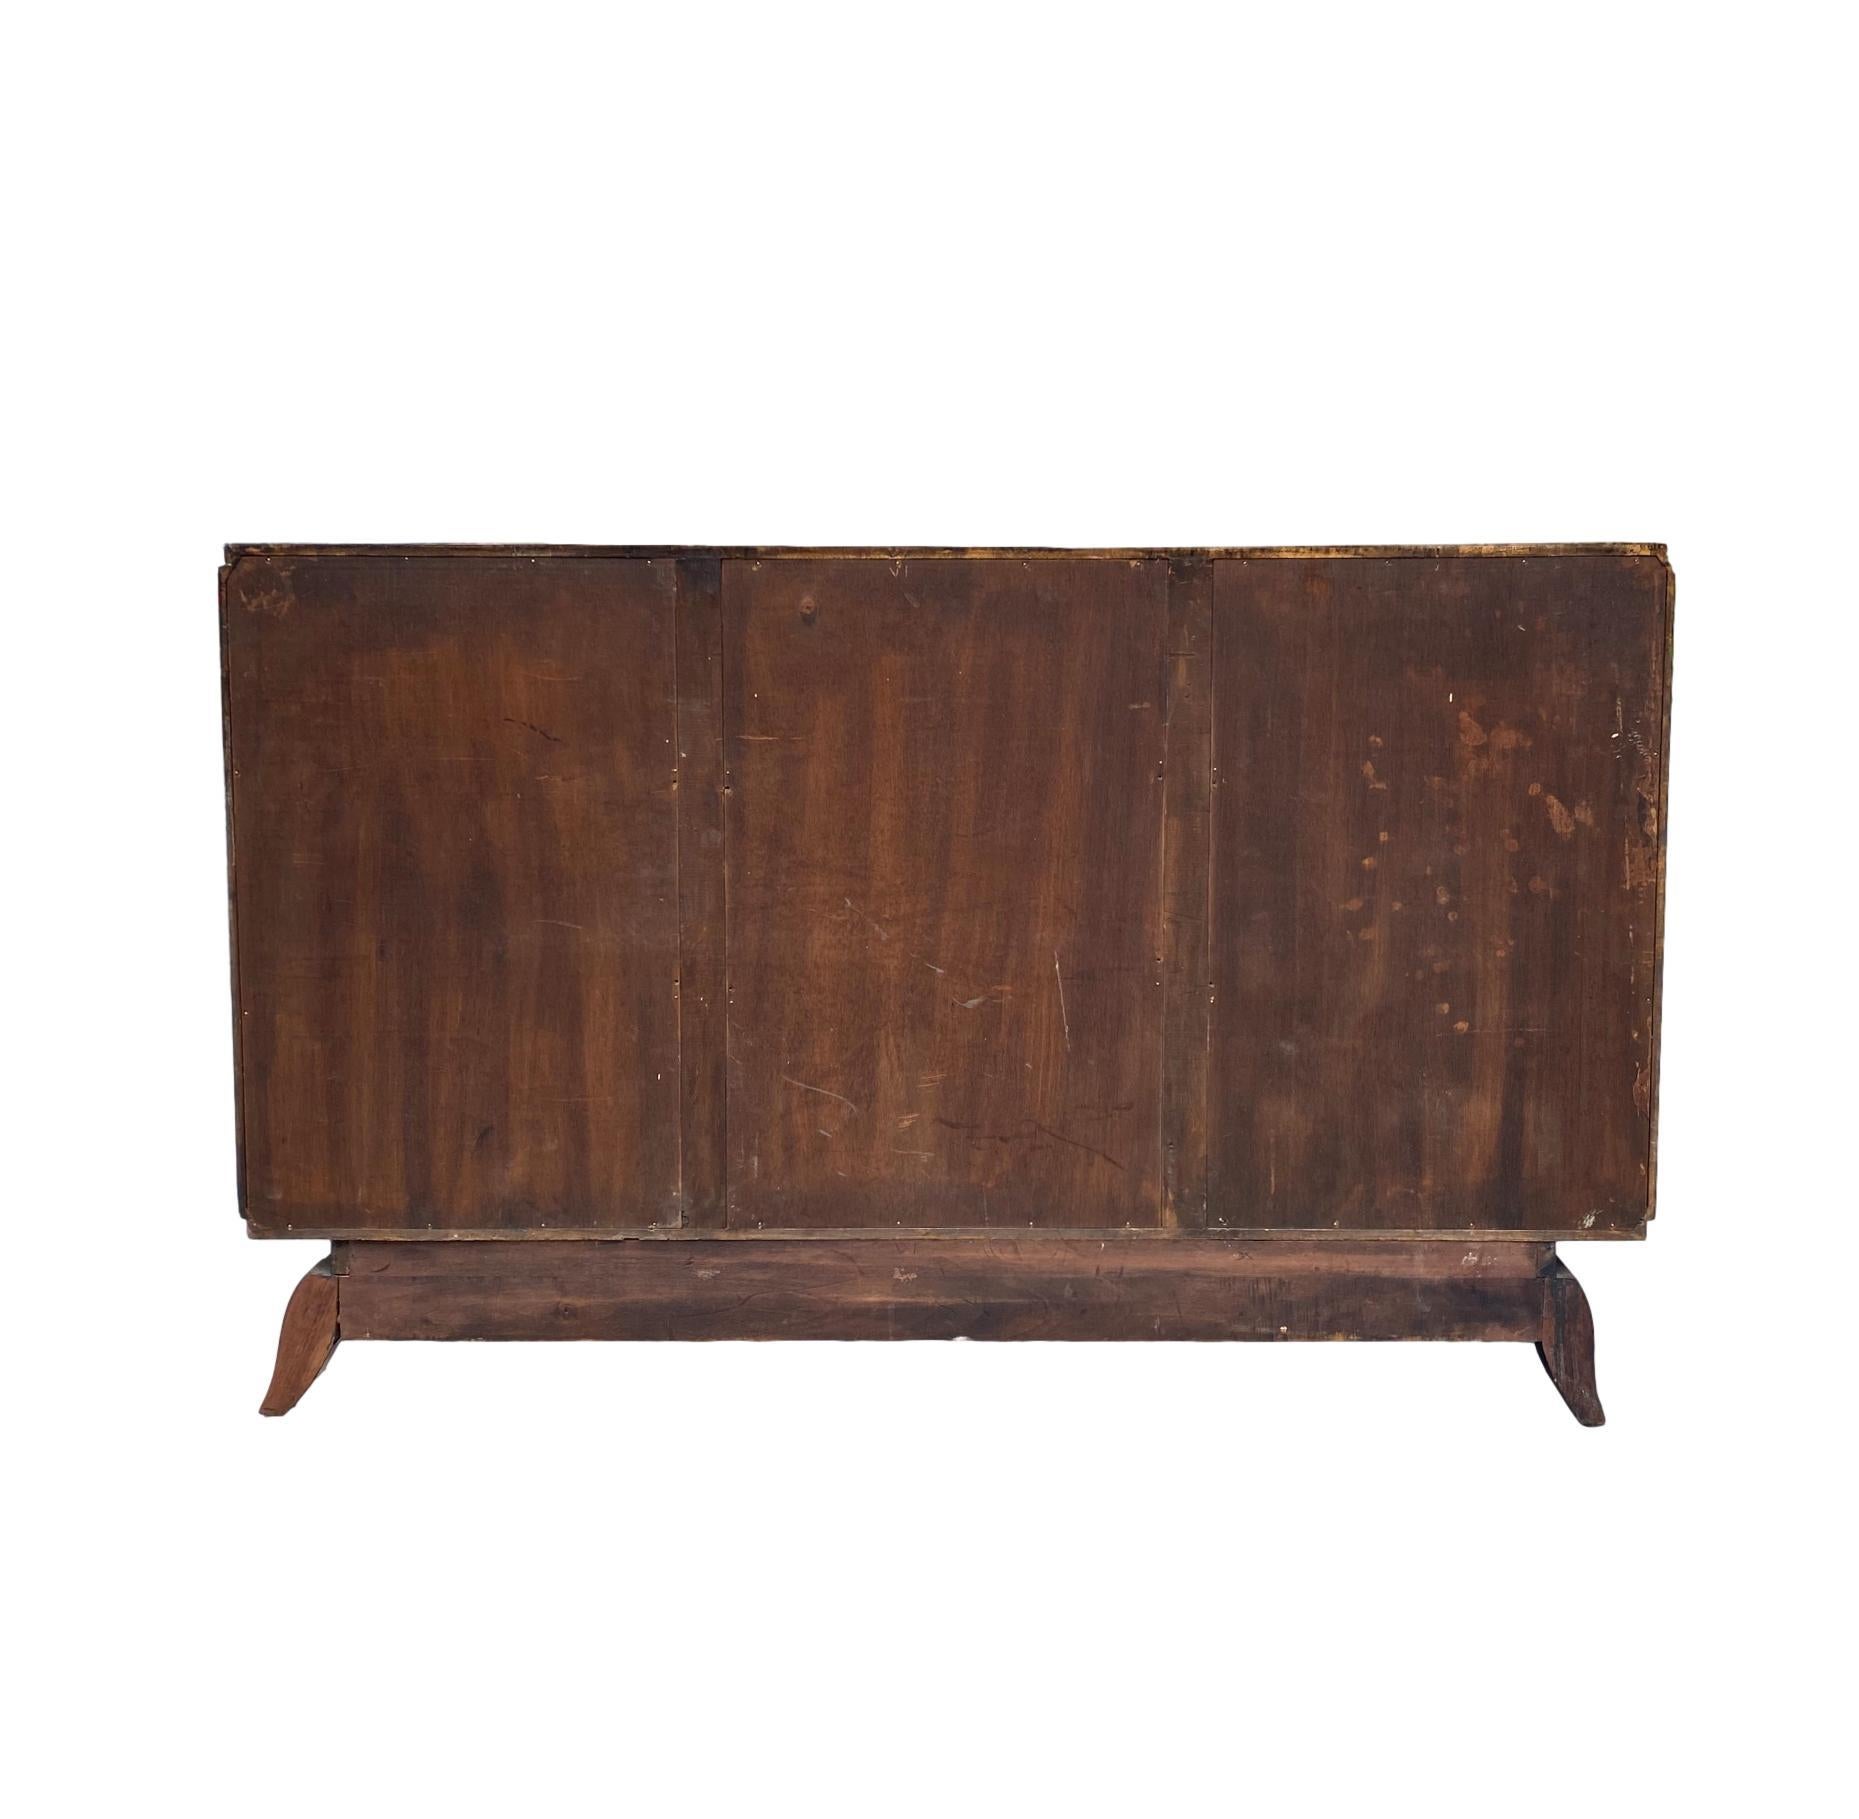 Mid-Century Modern Hollywood Regency Inlaid Rosewood Credenza, French, c. 1930 For Sale 2